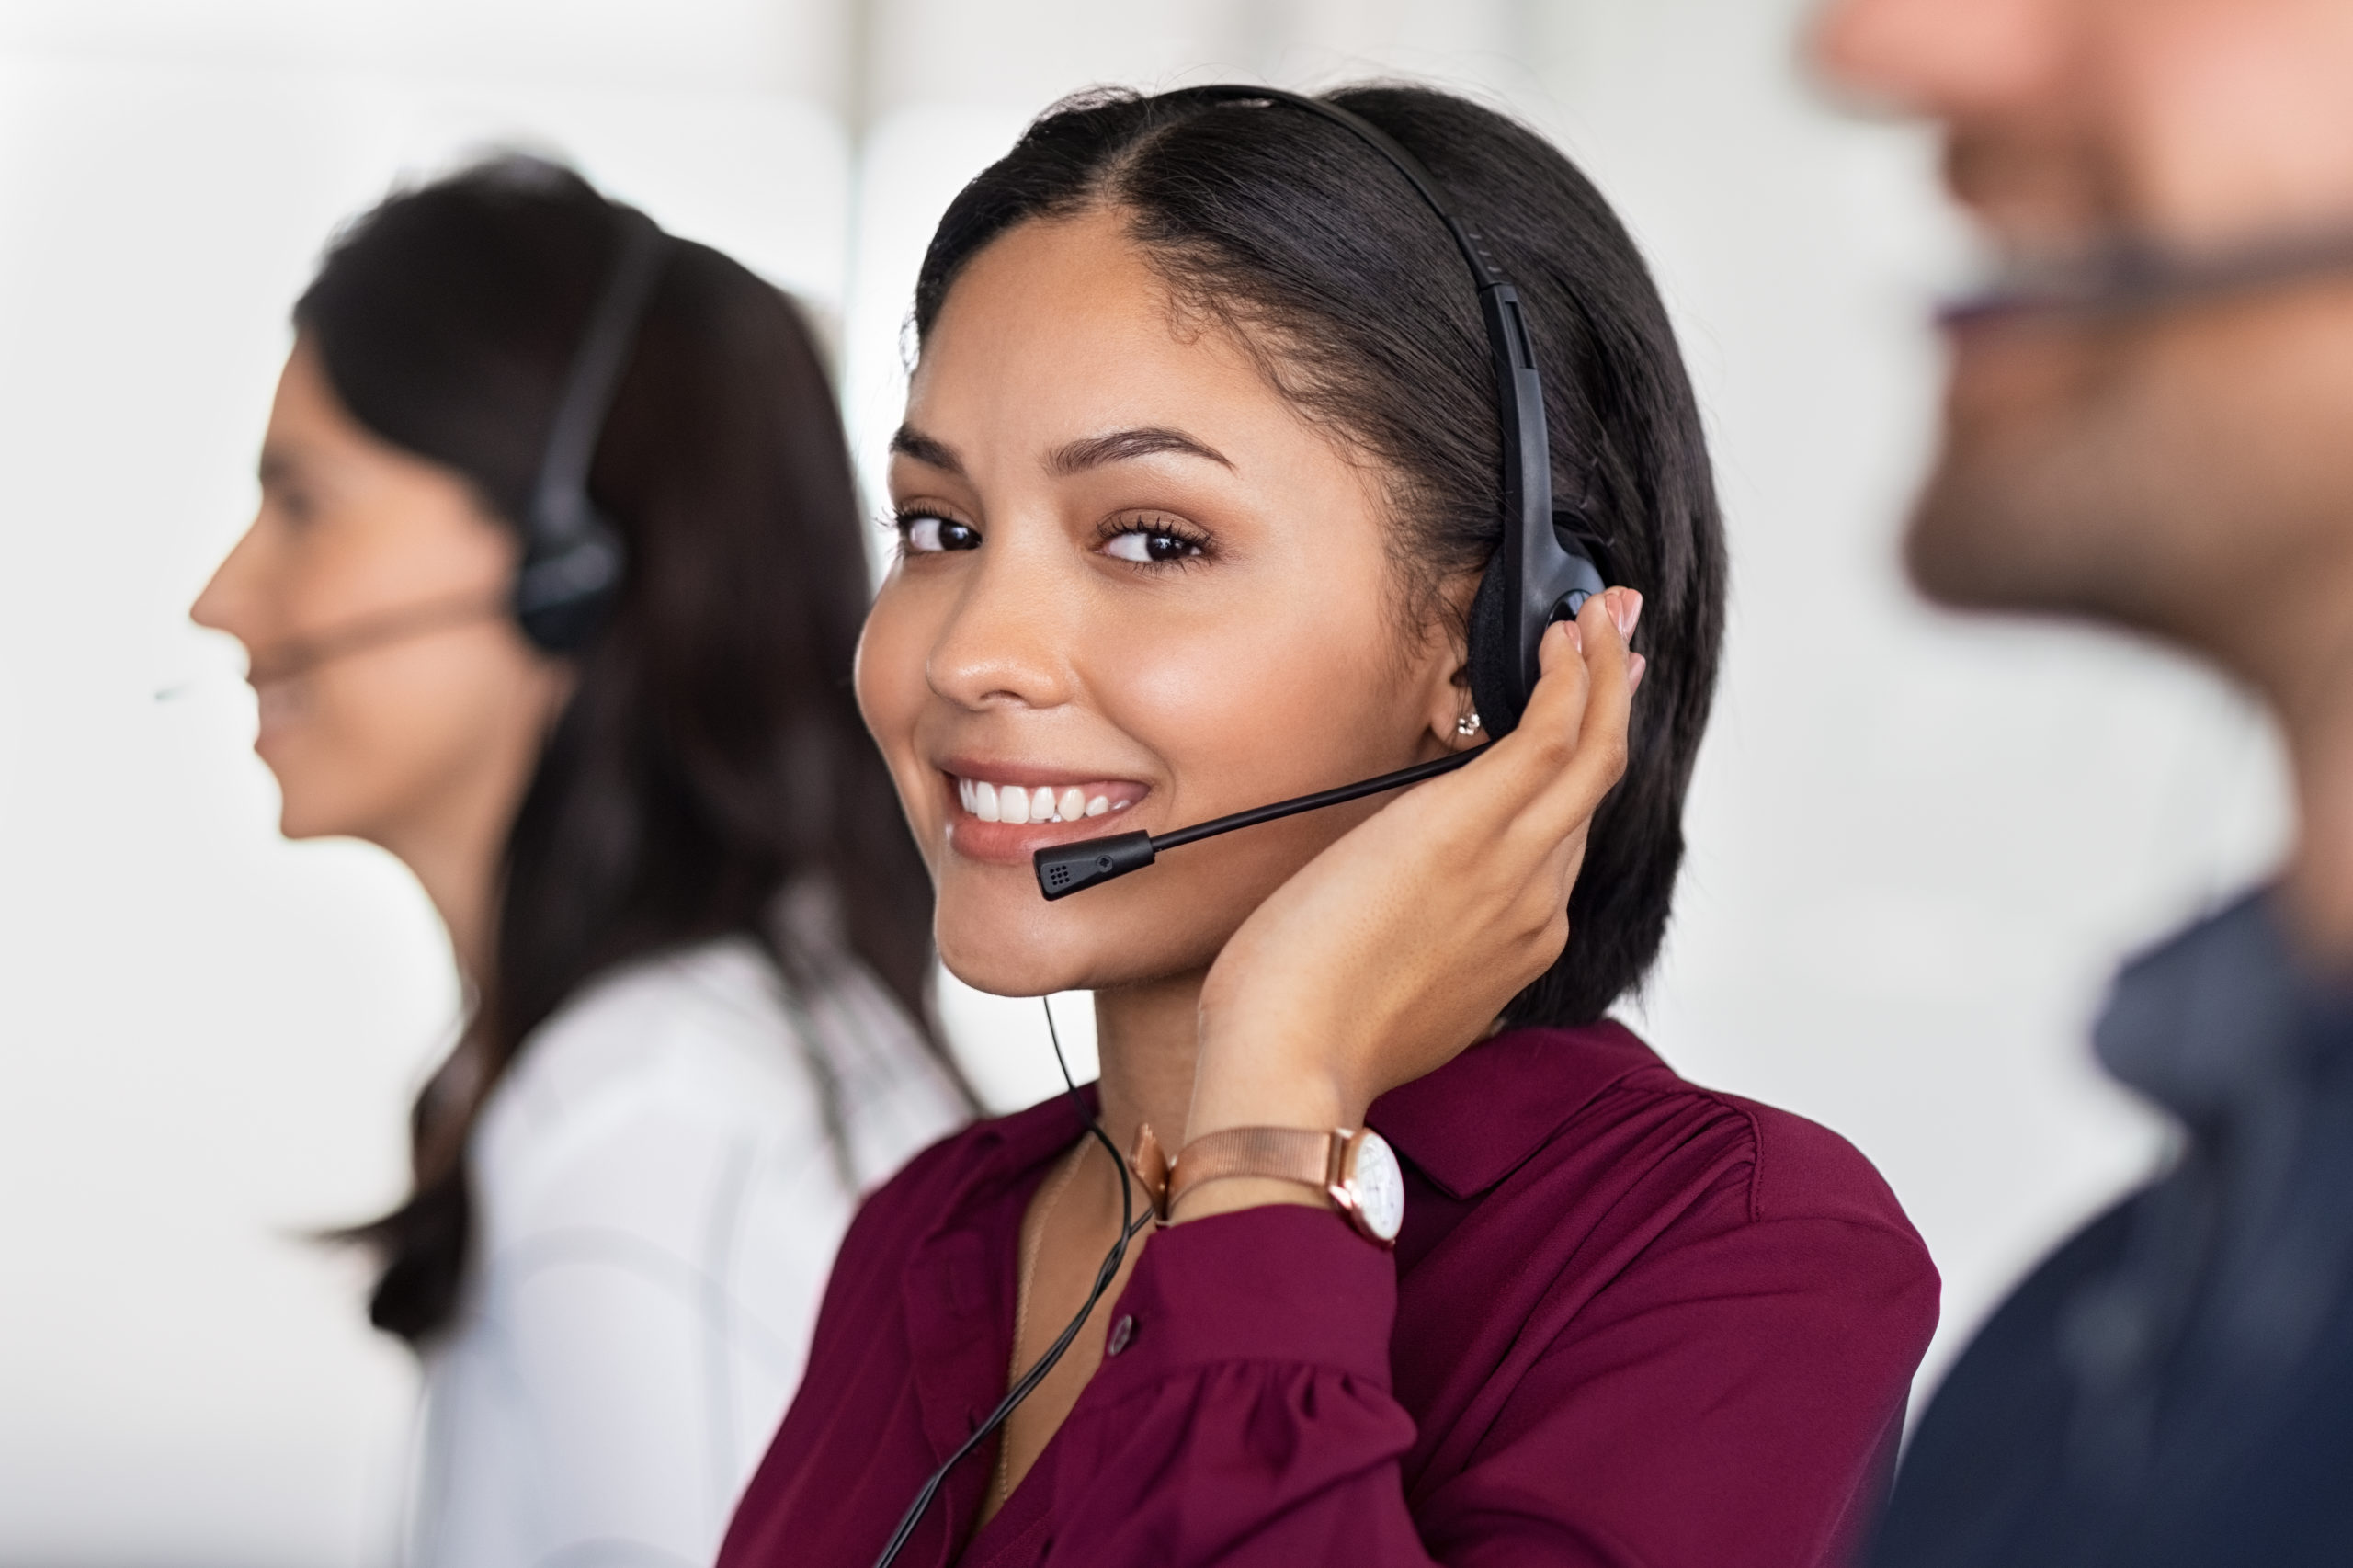 call center automation